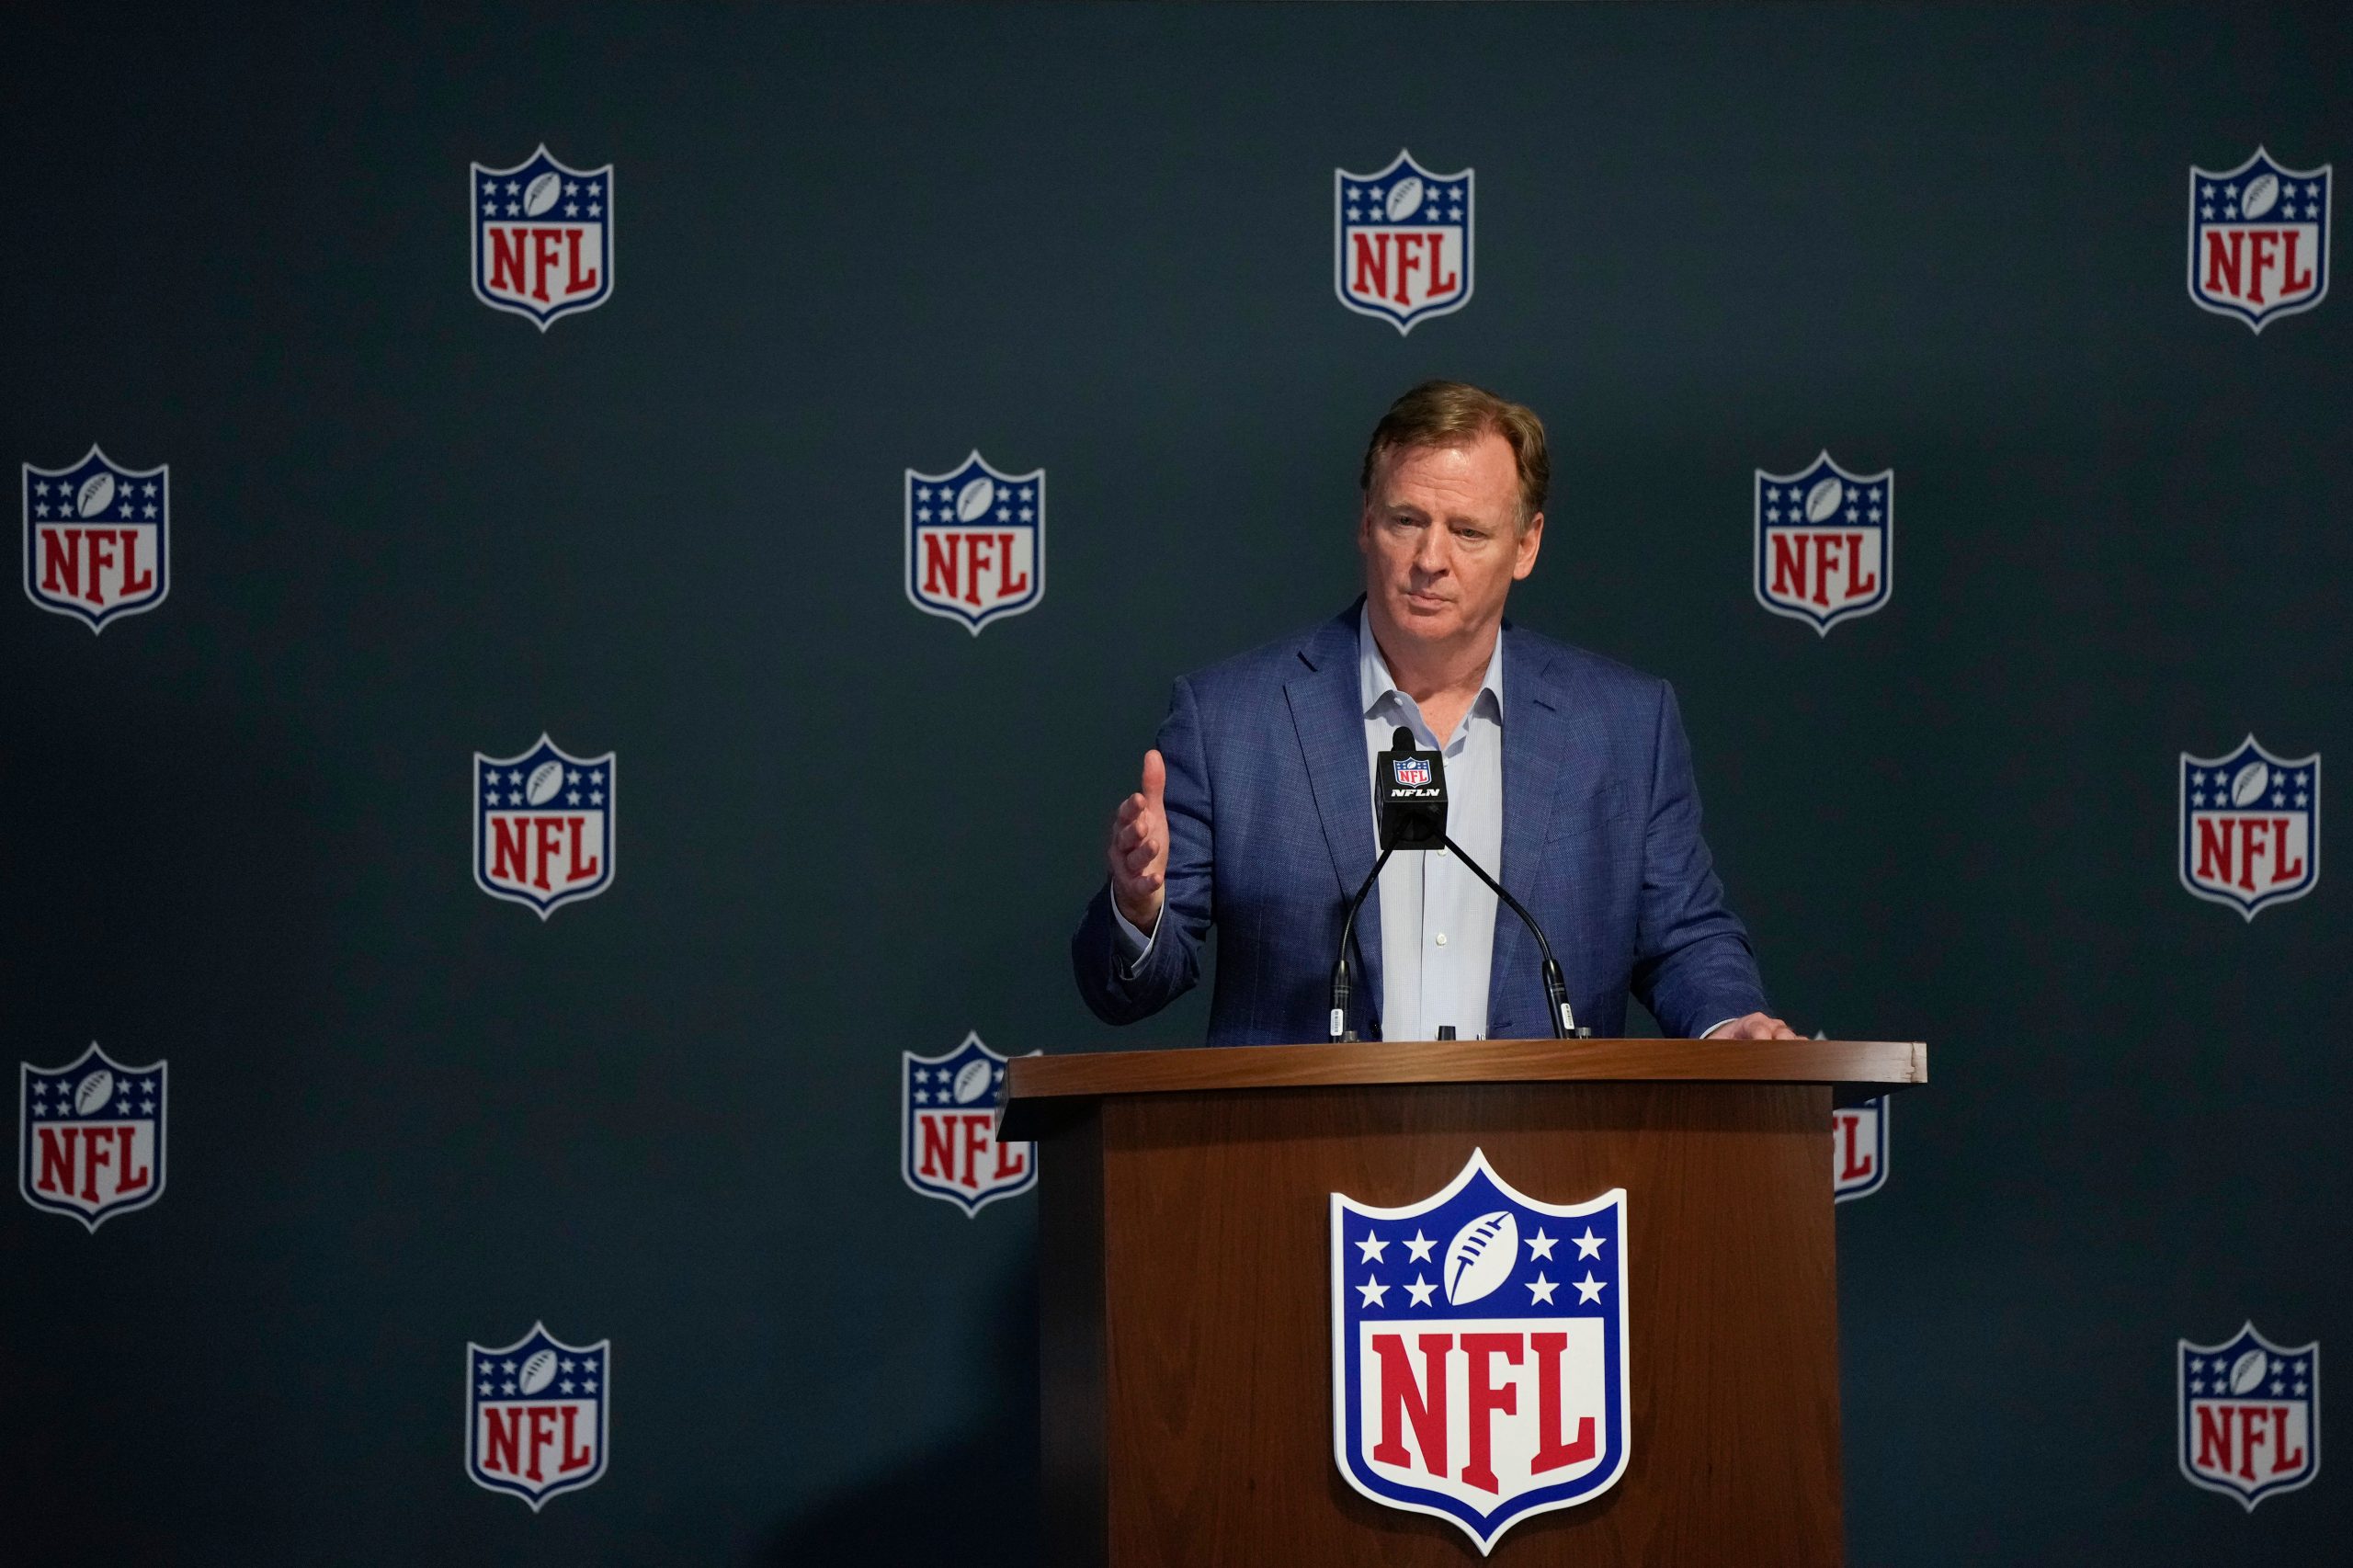 NFL assures ‘diverse, free’ workplace for women after investigation threat